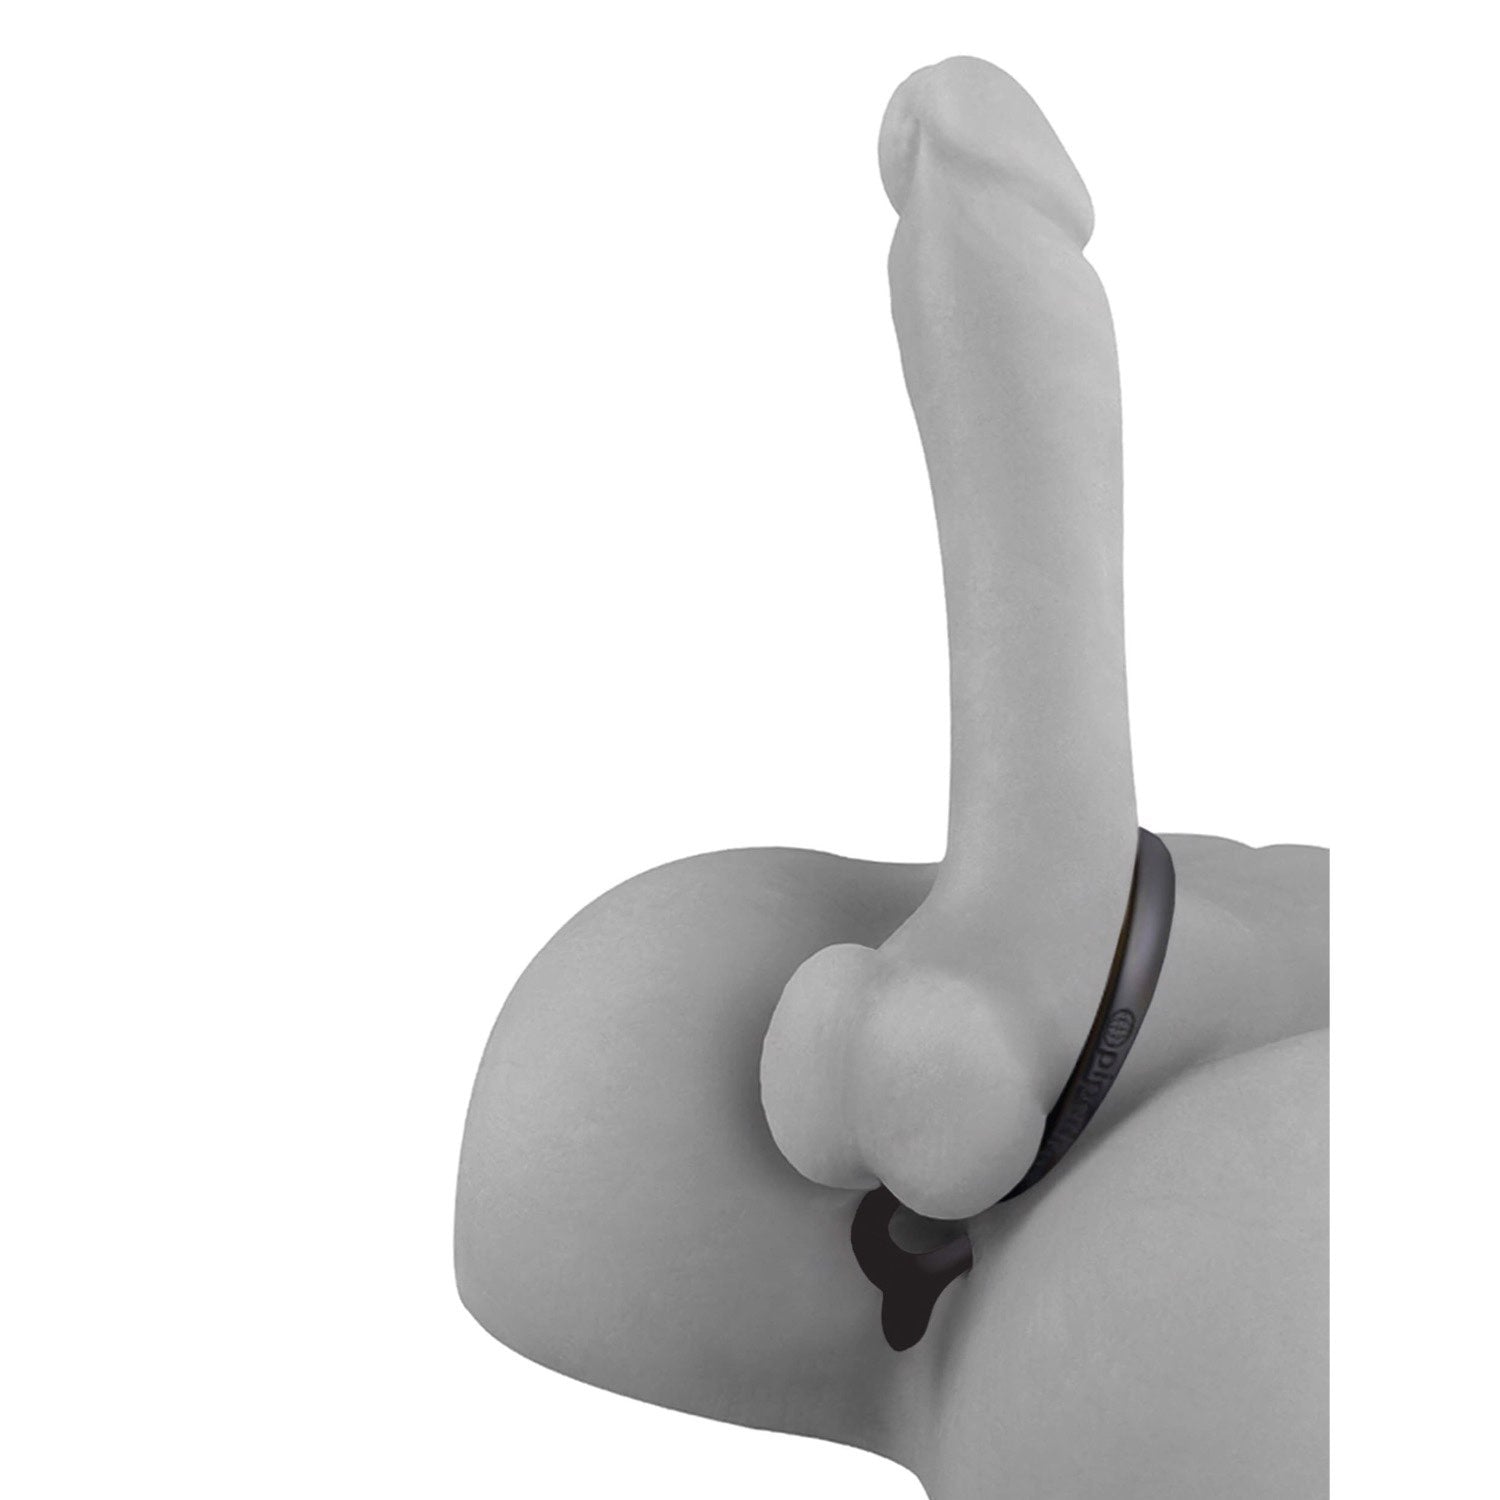 Fetish Fantasy Elite Ball Cinch With Anal Bead - Black Ball Ring with Anal Bead by Pipedream